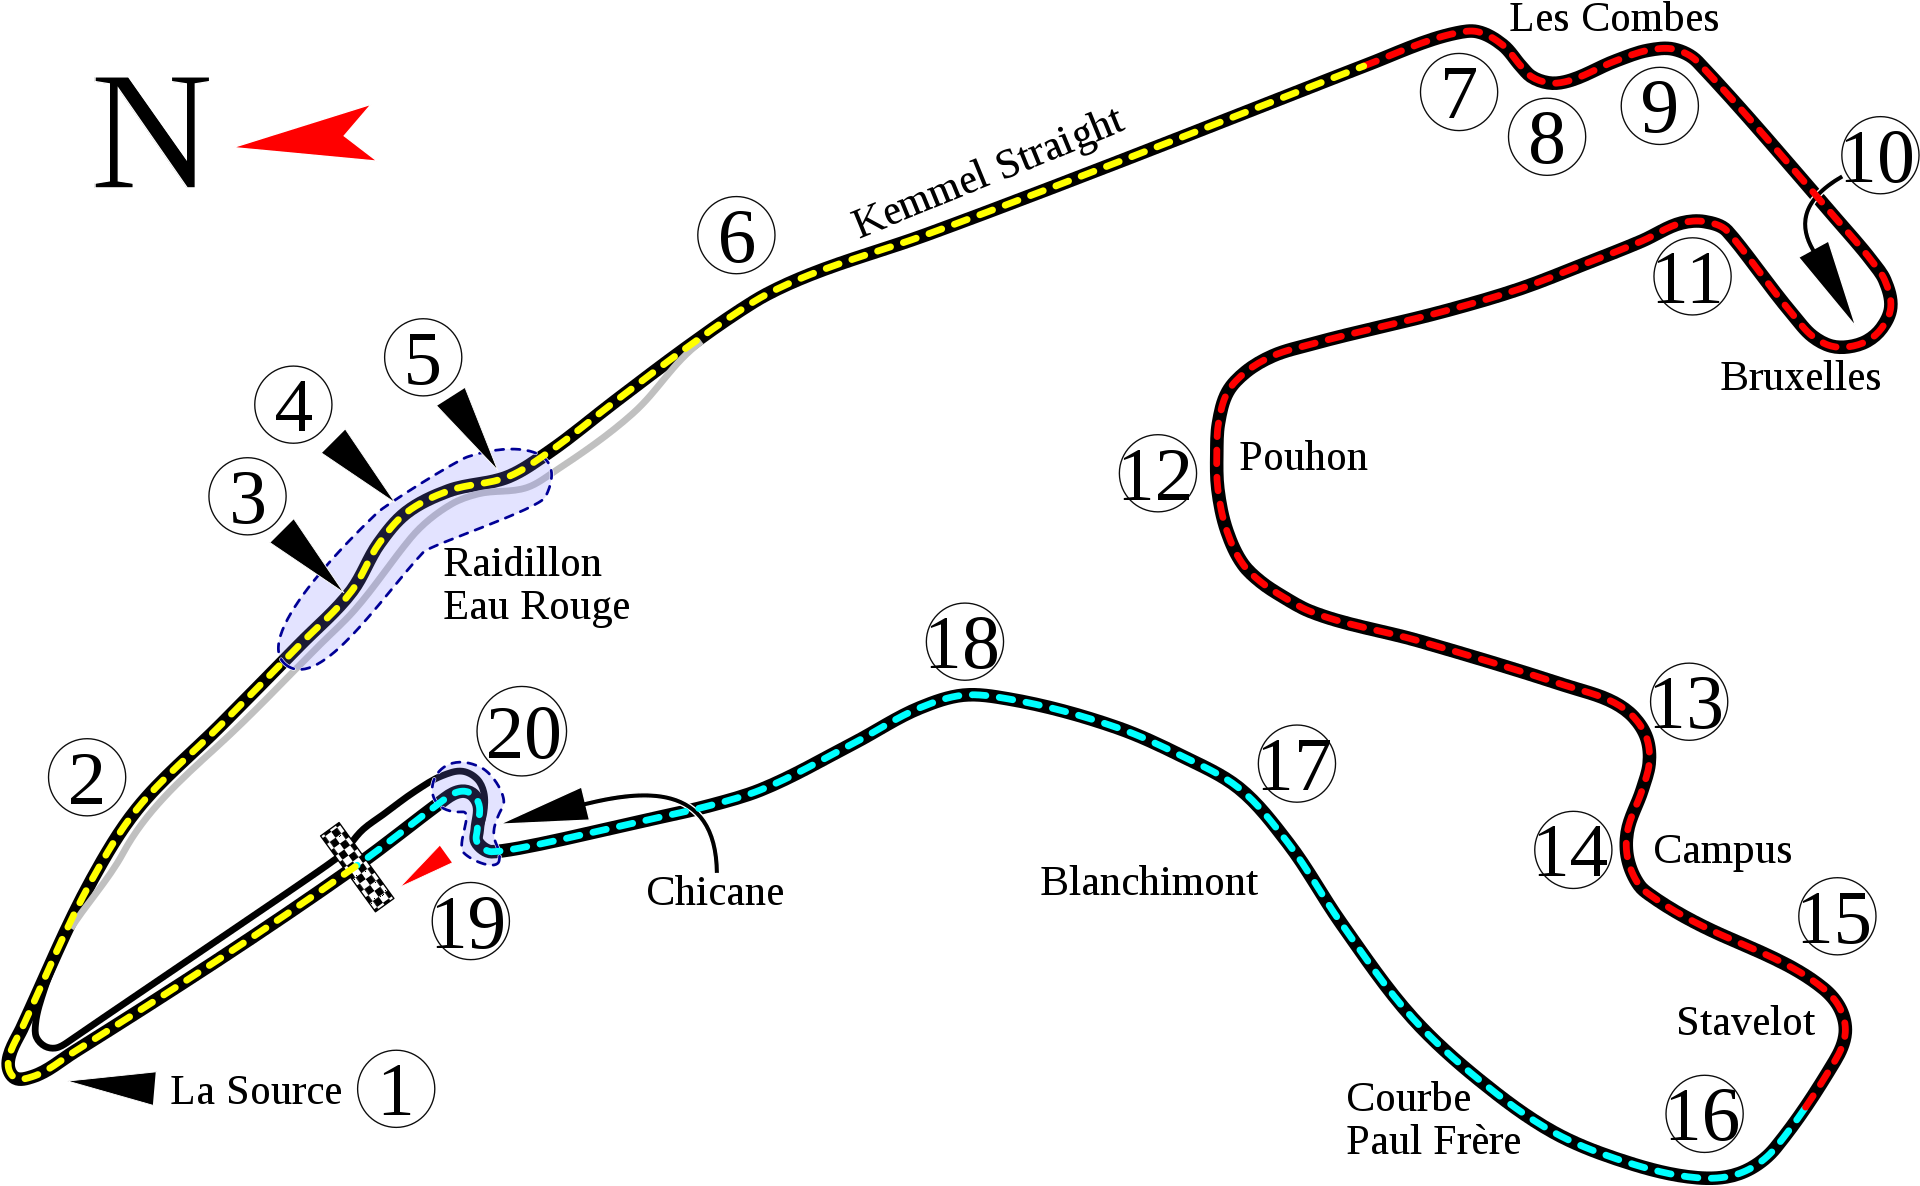 Spa Francorchamps of Belgiumsvg